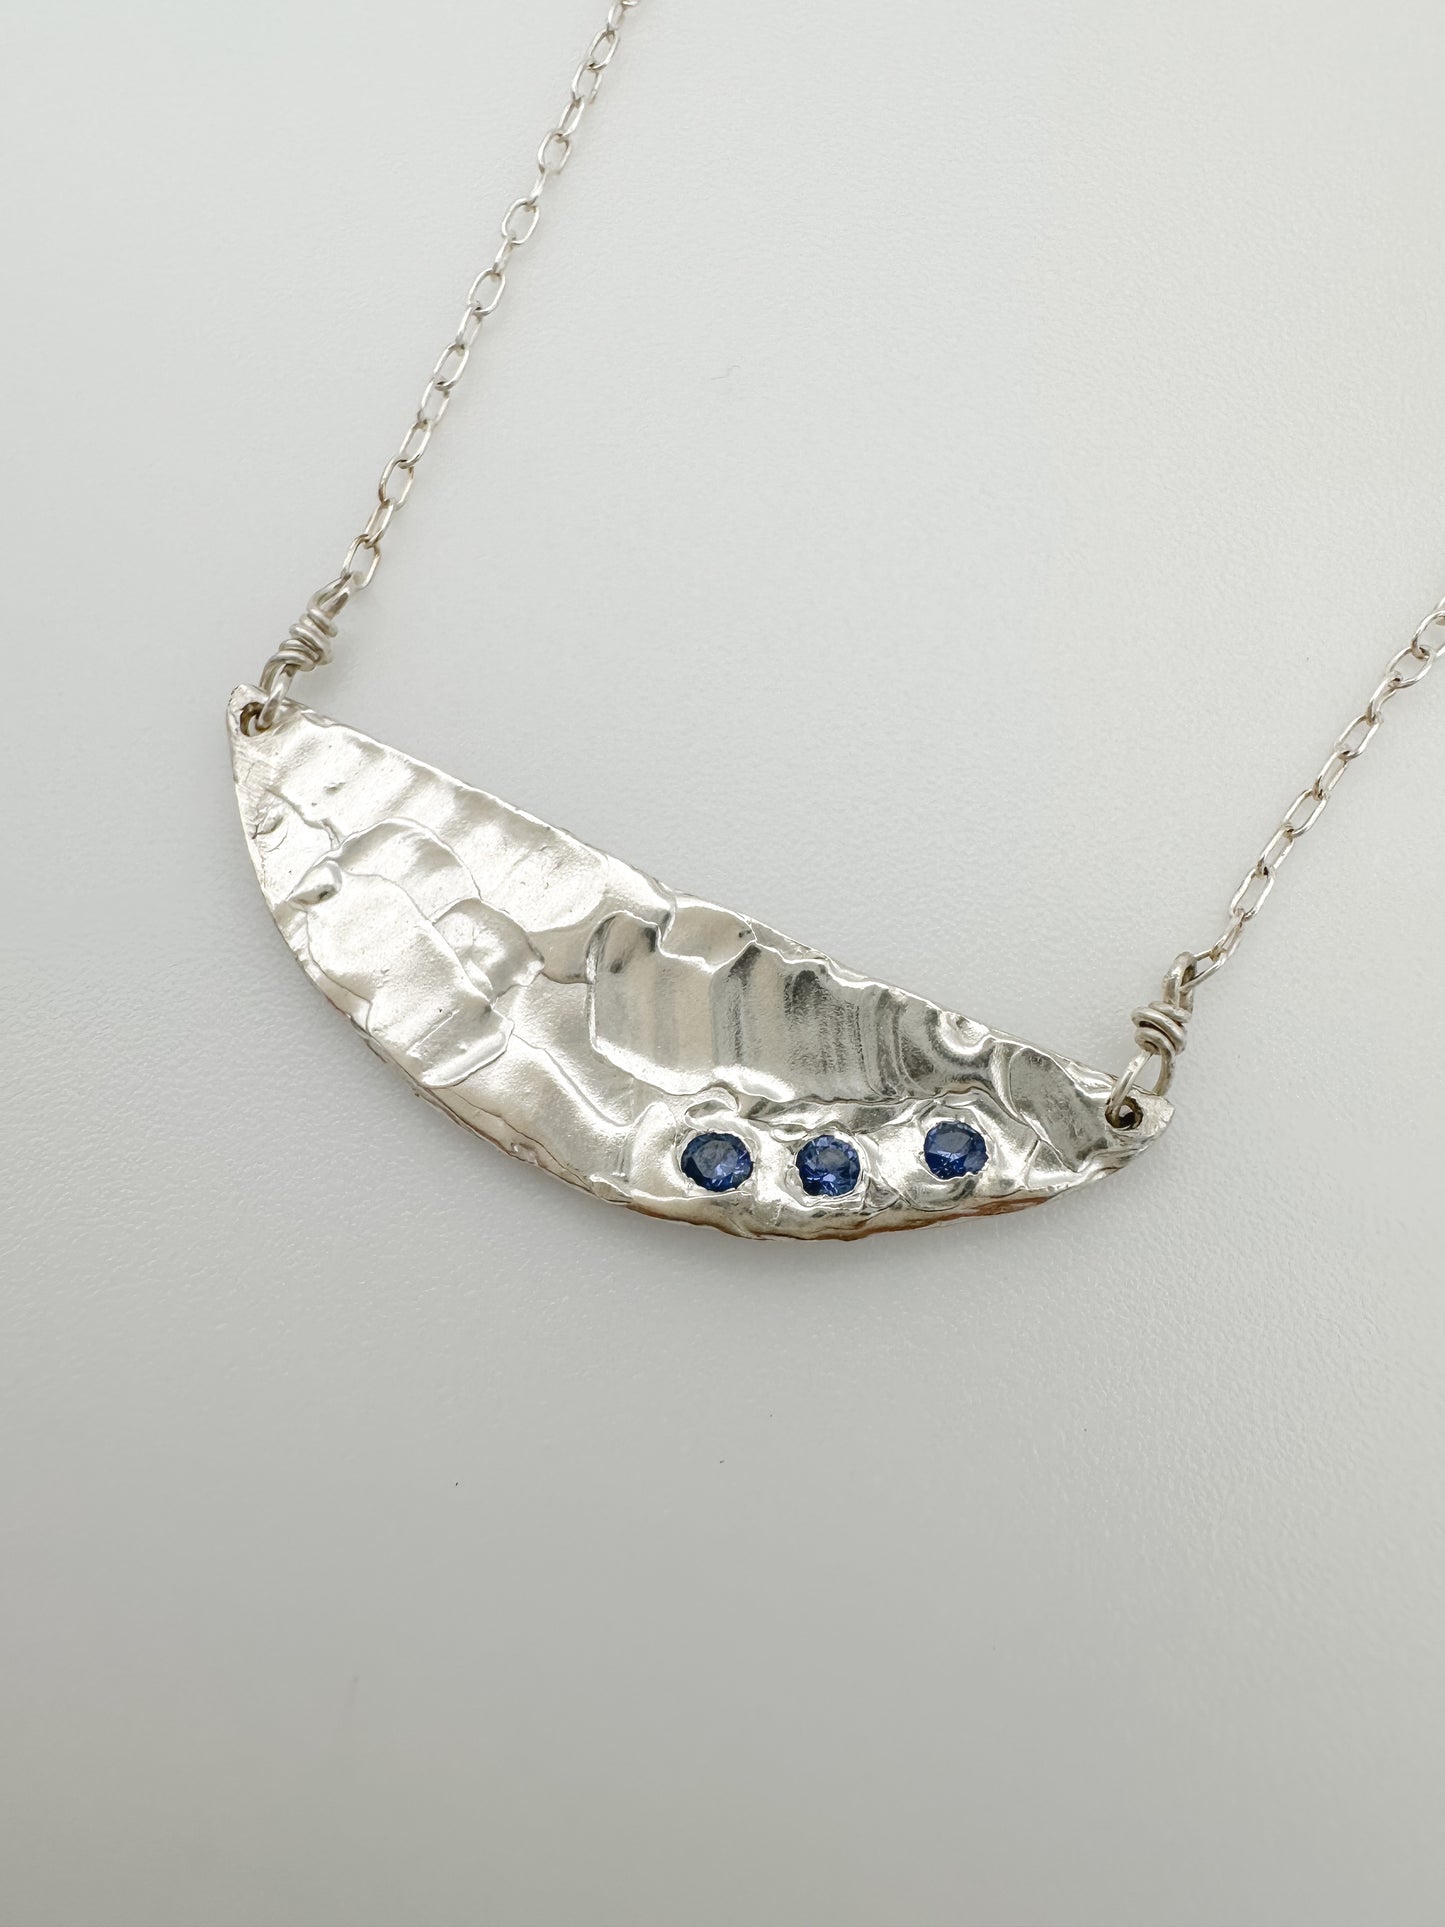 DEMI LUNE | 3 blue sapphires nestled in half moon necklace with recycled sterling silver